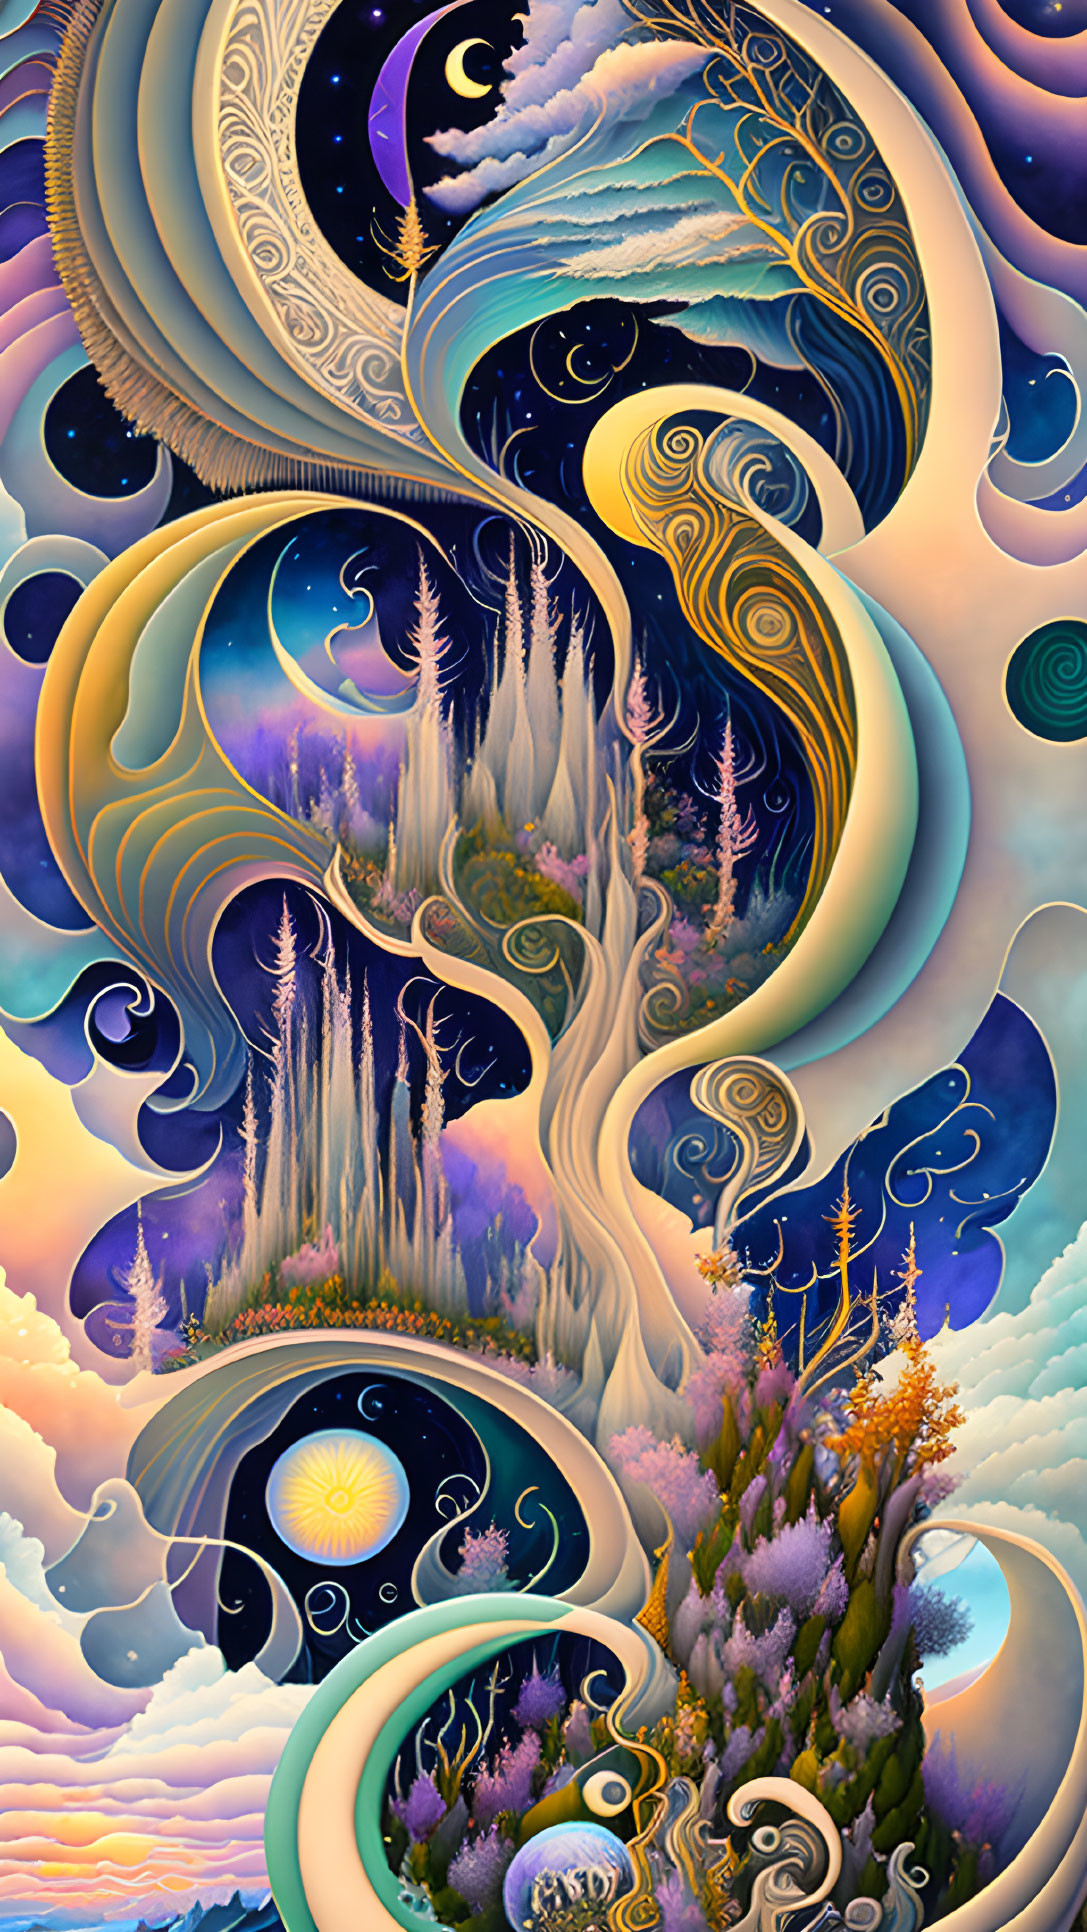 Surreal nature and cosmic artwork with moons, stars, trees, and waves